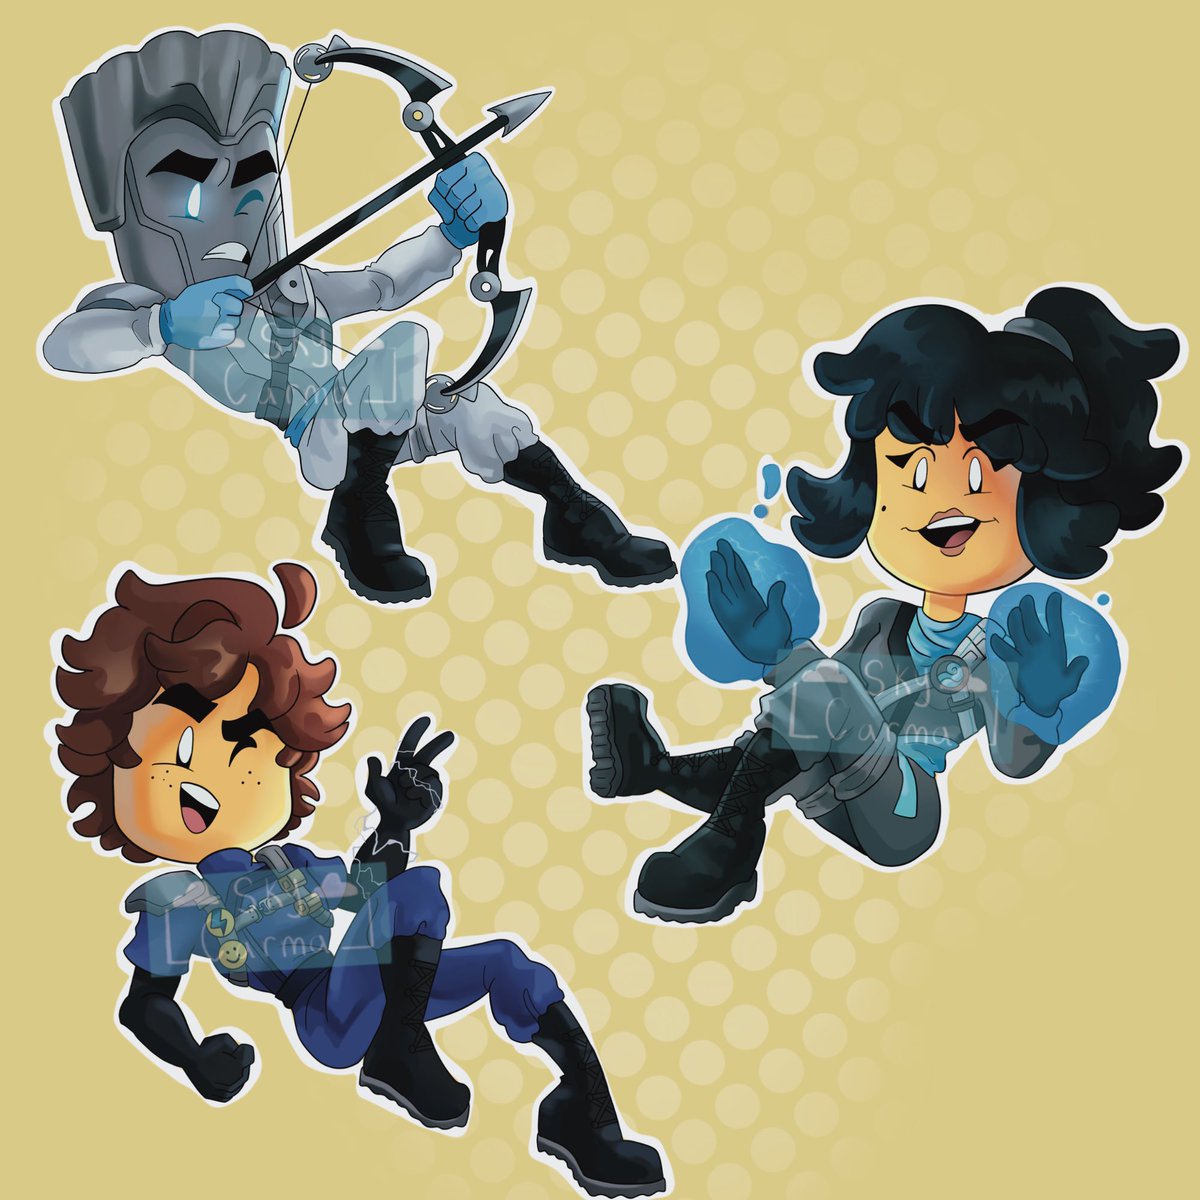 Here’s are the designs for keychains that will be available soon! Follow for updates! #ninjago #ninjagofanart